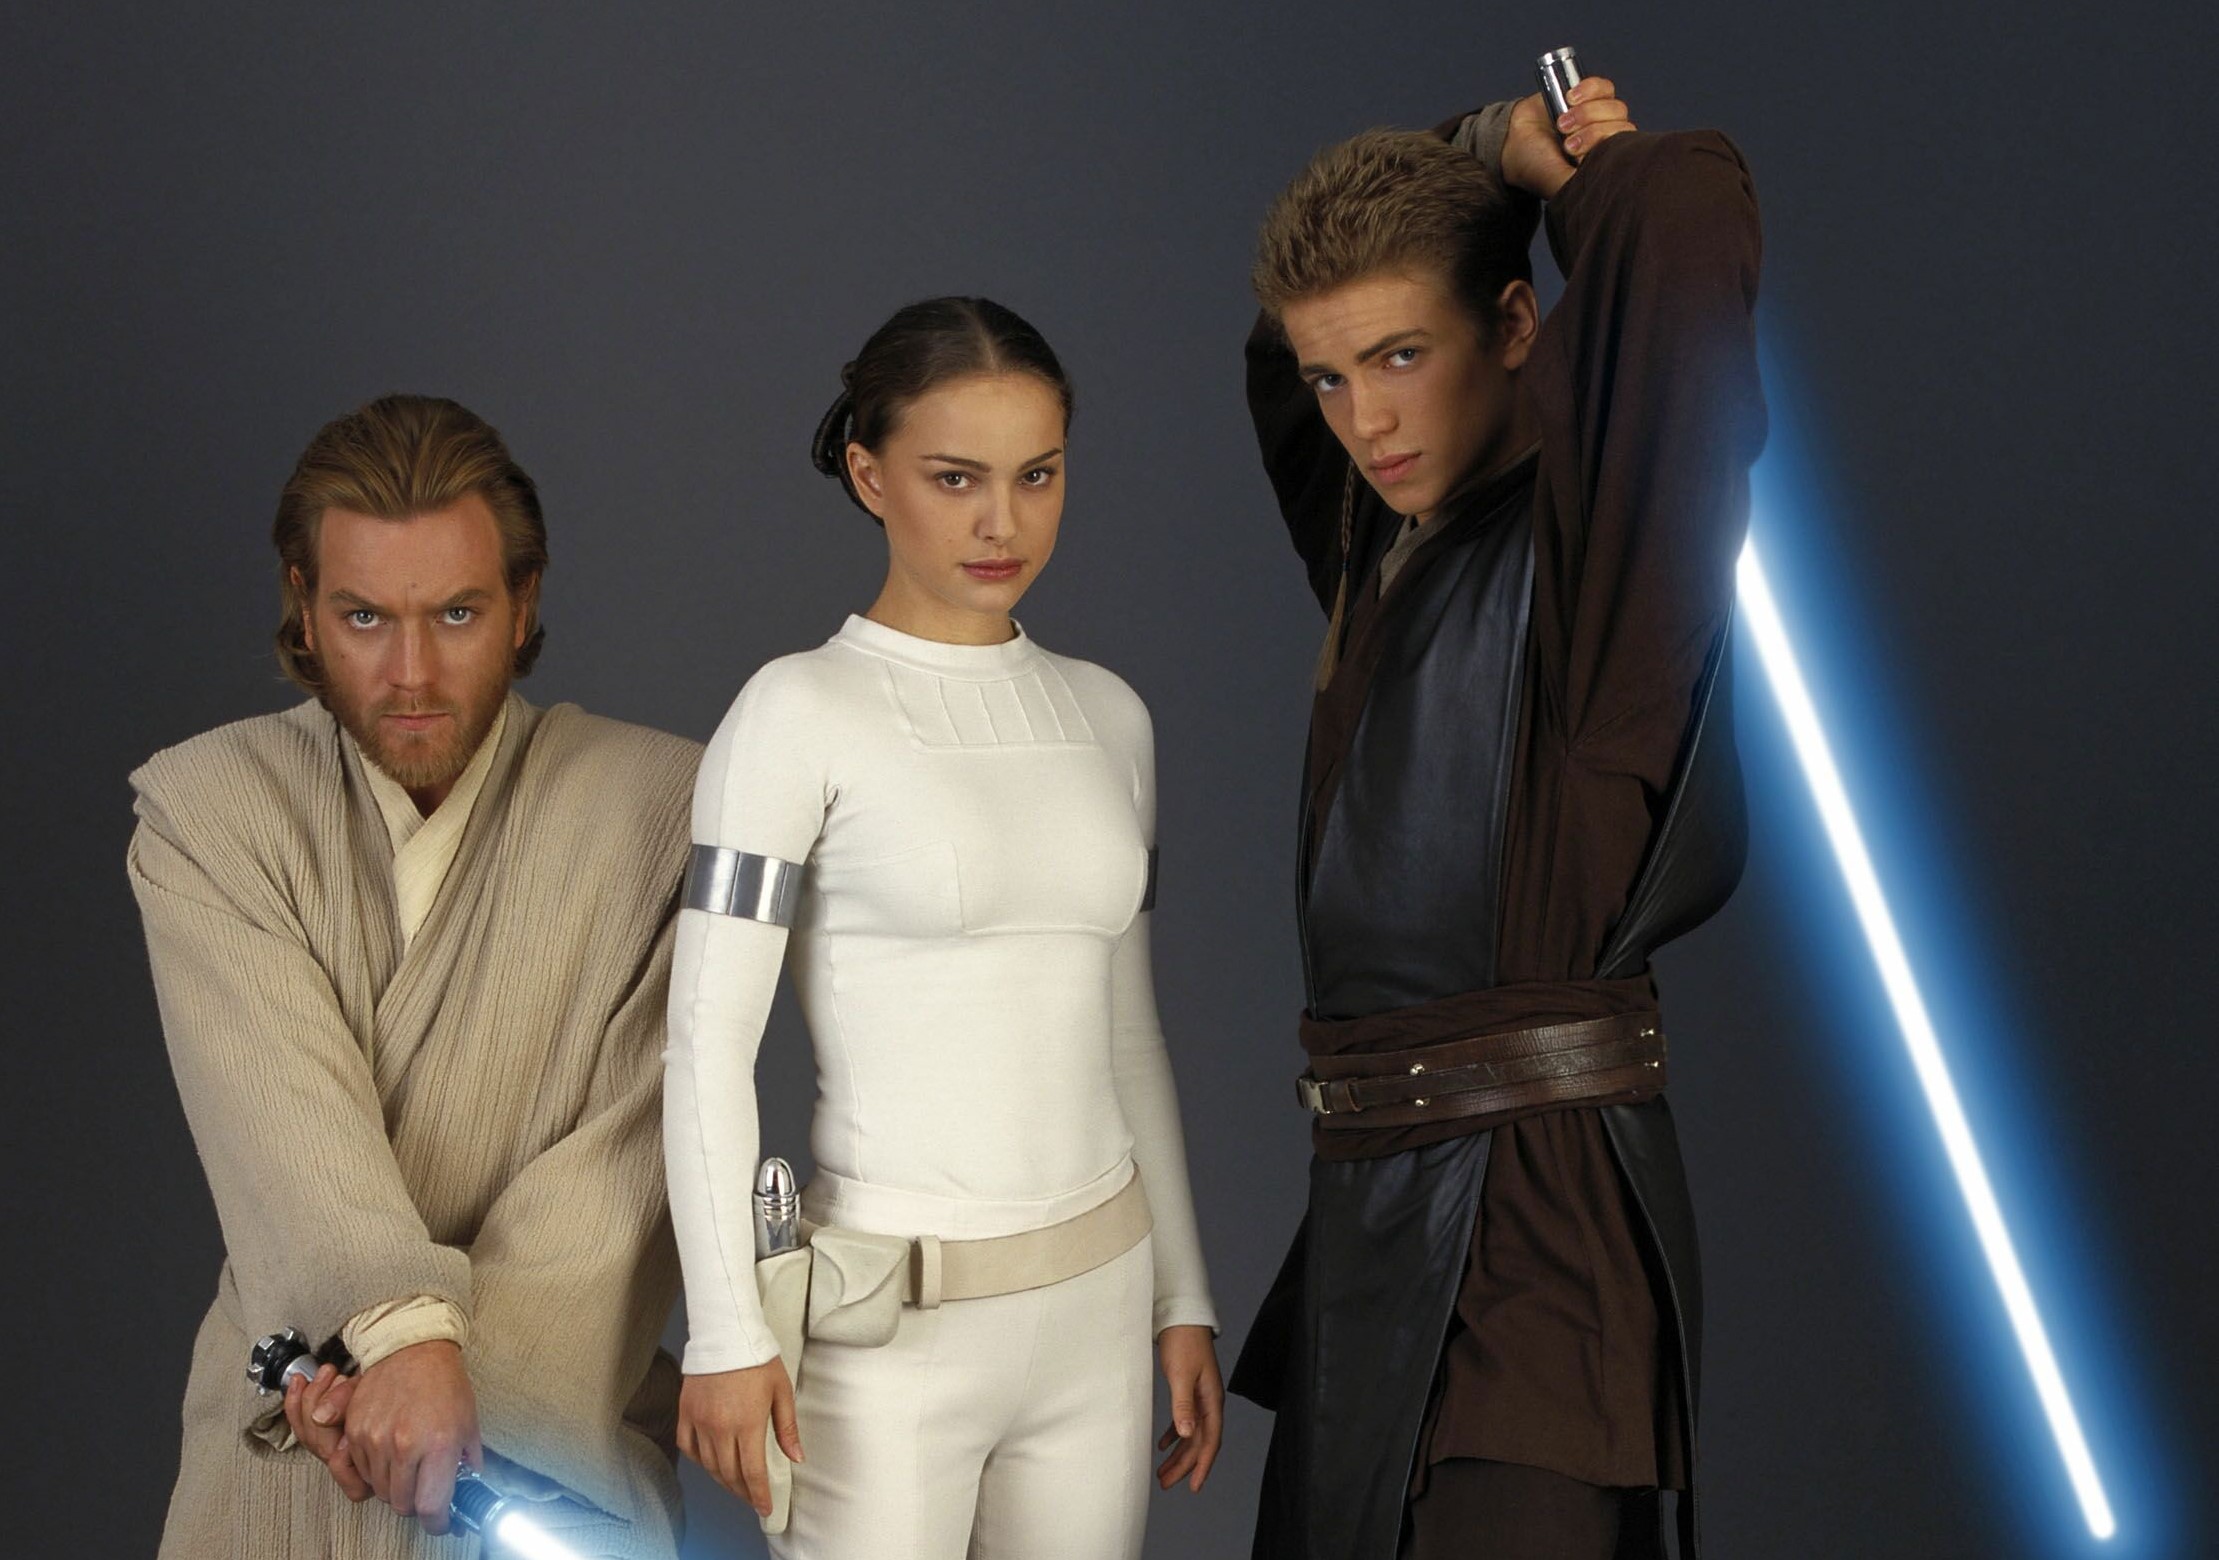 Movie Star Wars Episode II: Attack Of The Clones HD Wallpaper | Background Image